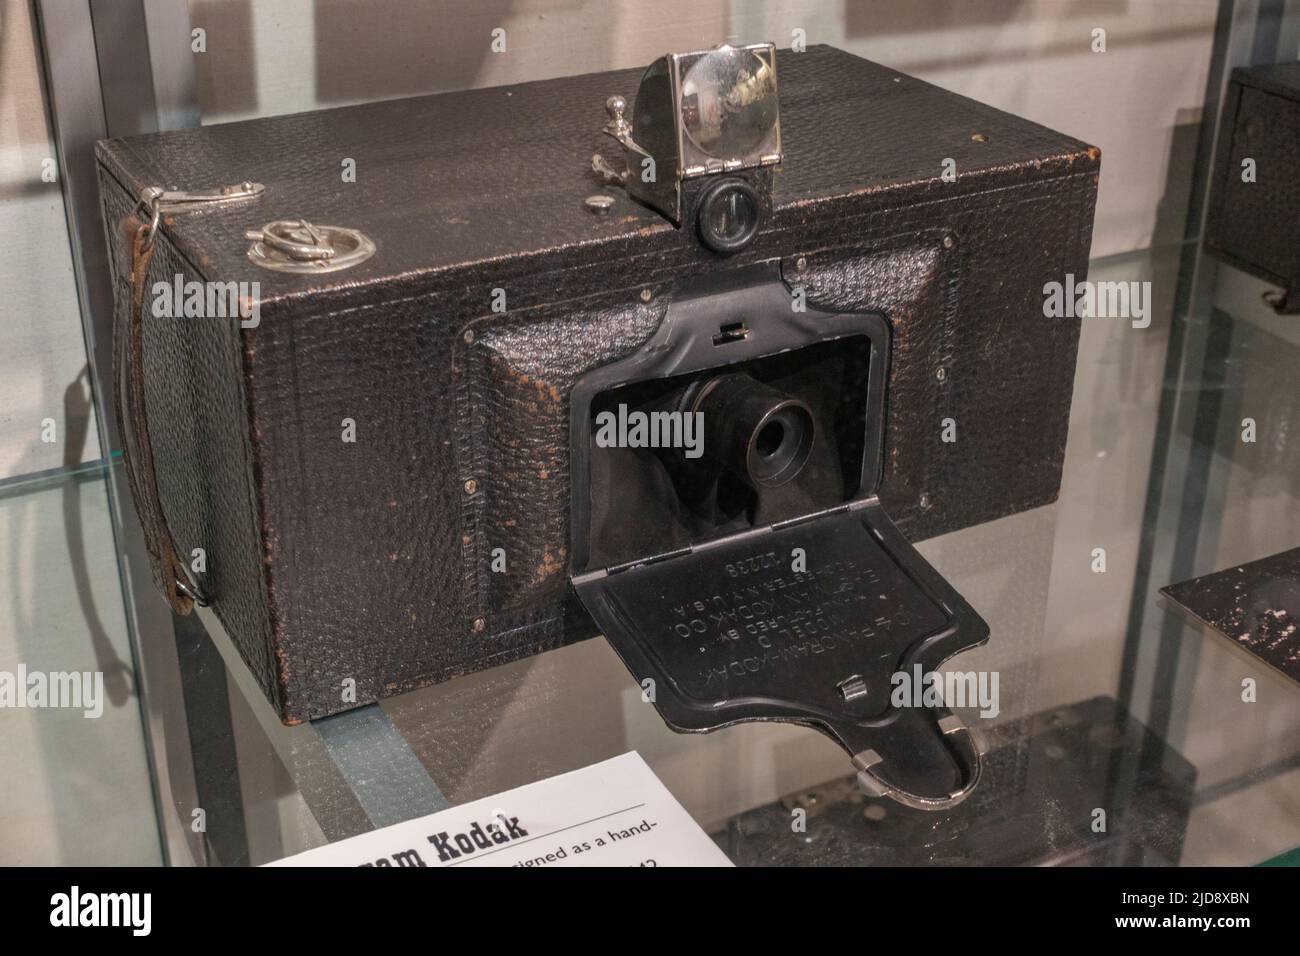 The No 4 Panoram Kodak camera from 1899 for panoramic photography on display in a media museum. Stock Photo